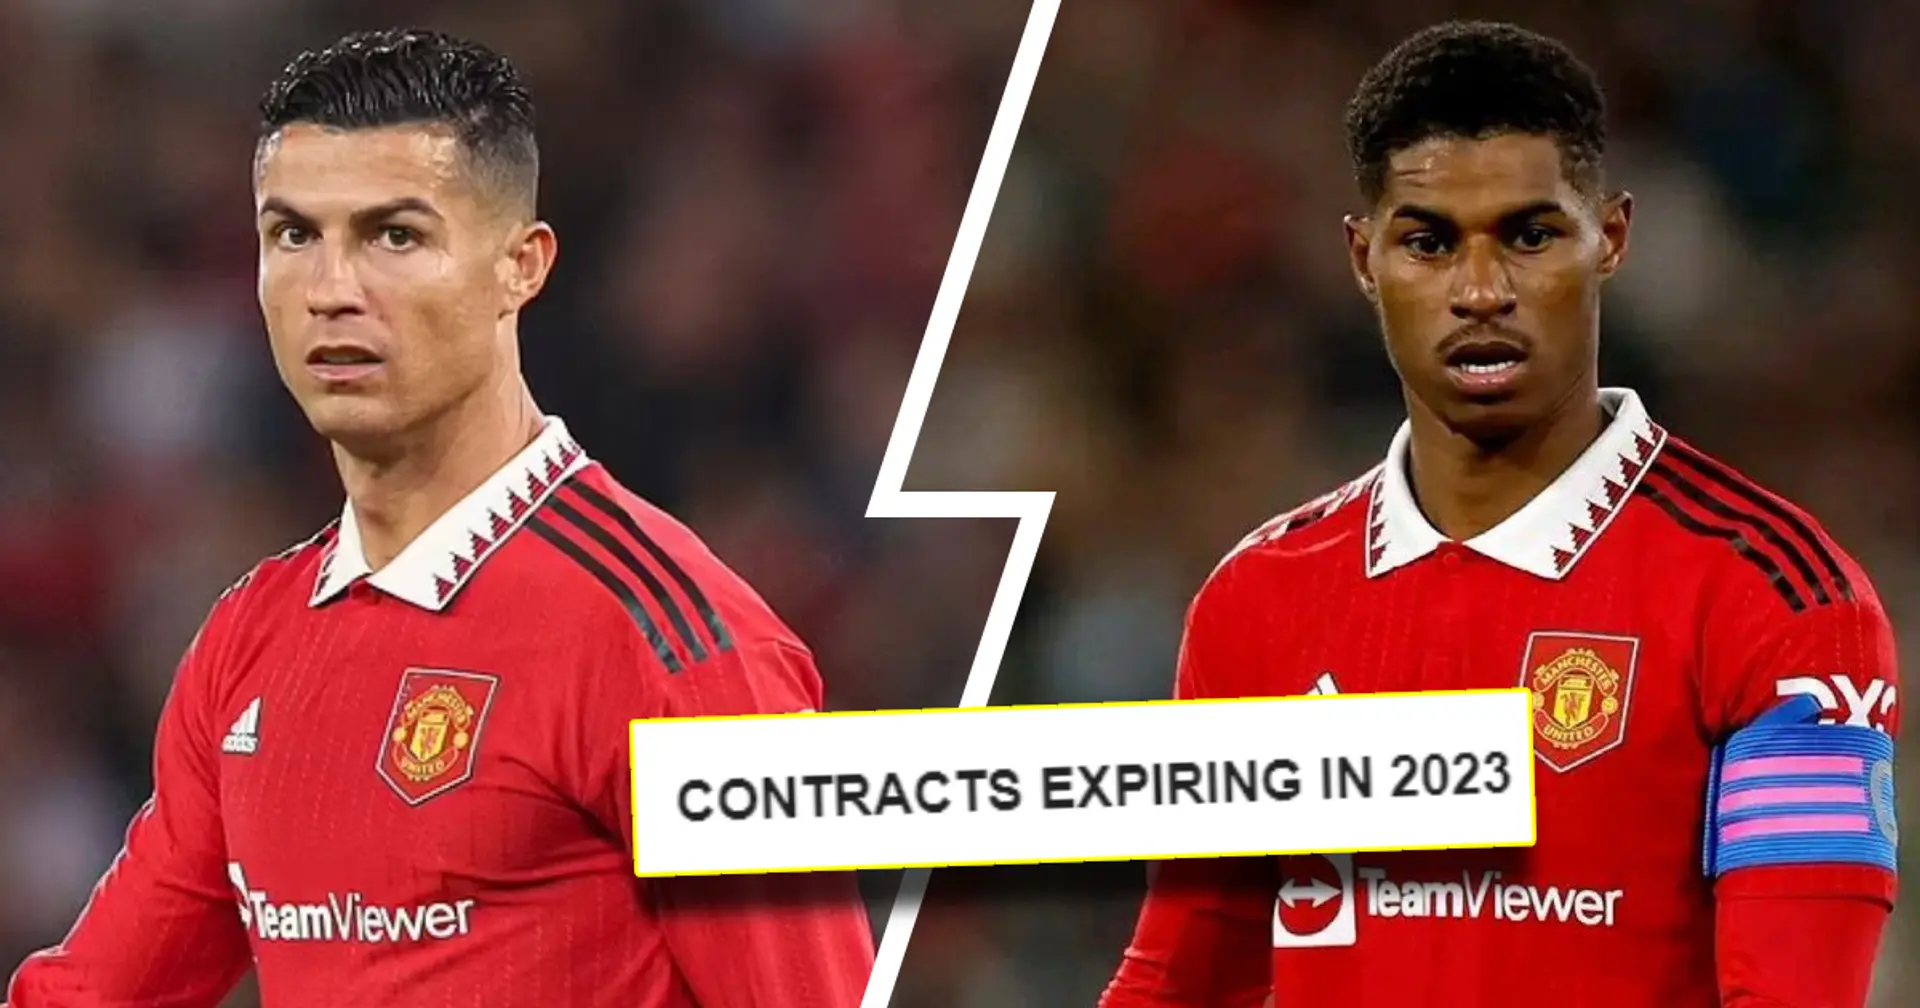 10 players who will be free to leave Man United next summer: Latest contract round-up